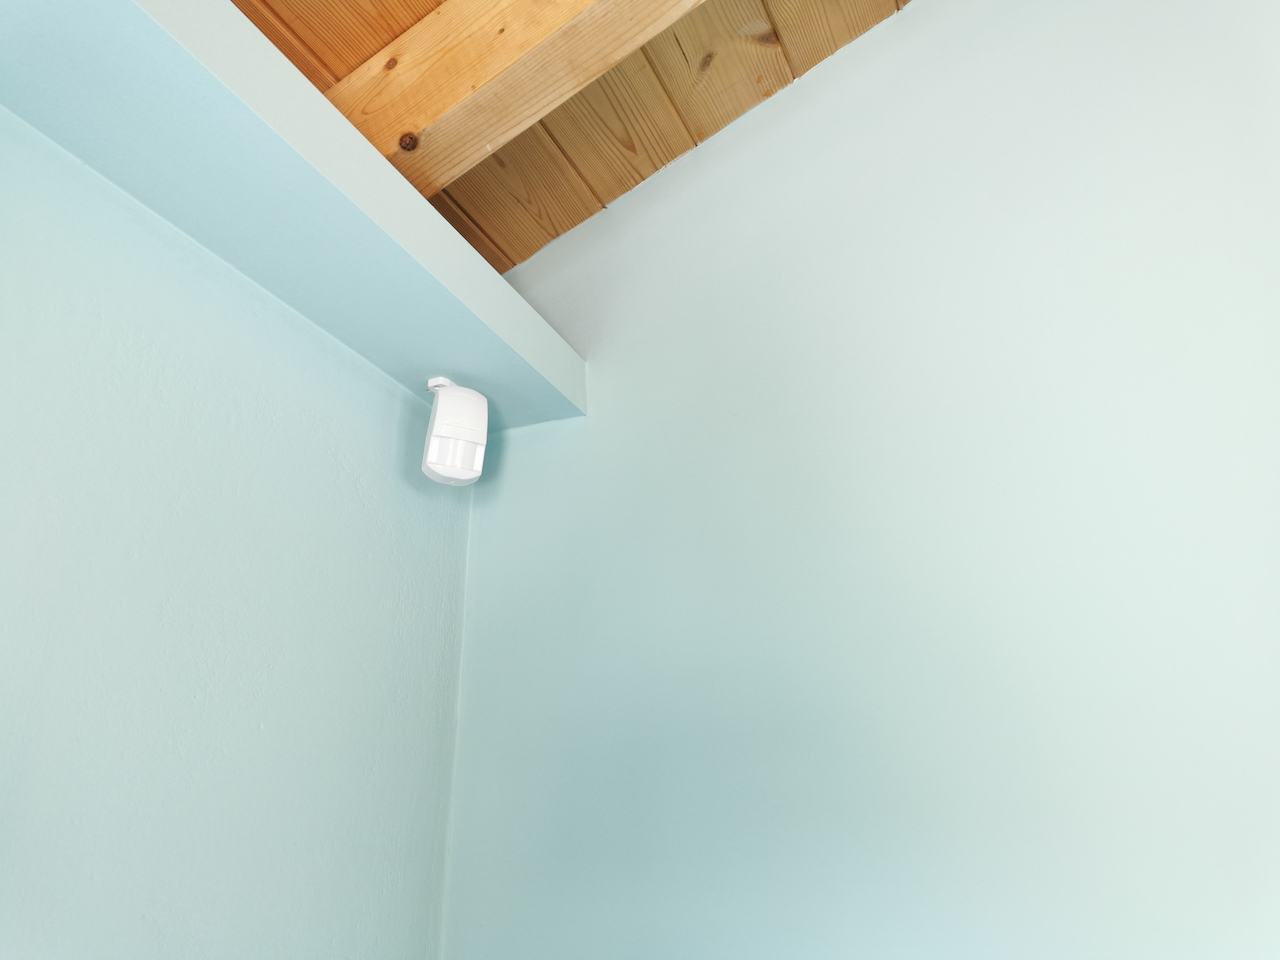 Motion sensor or detector for security system mounted on blue wall in mansard room with wooden ceiling.